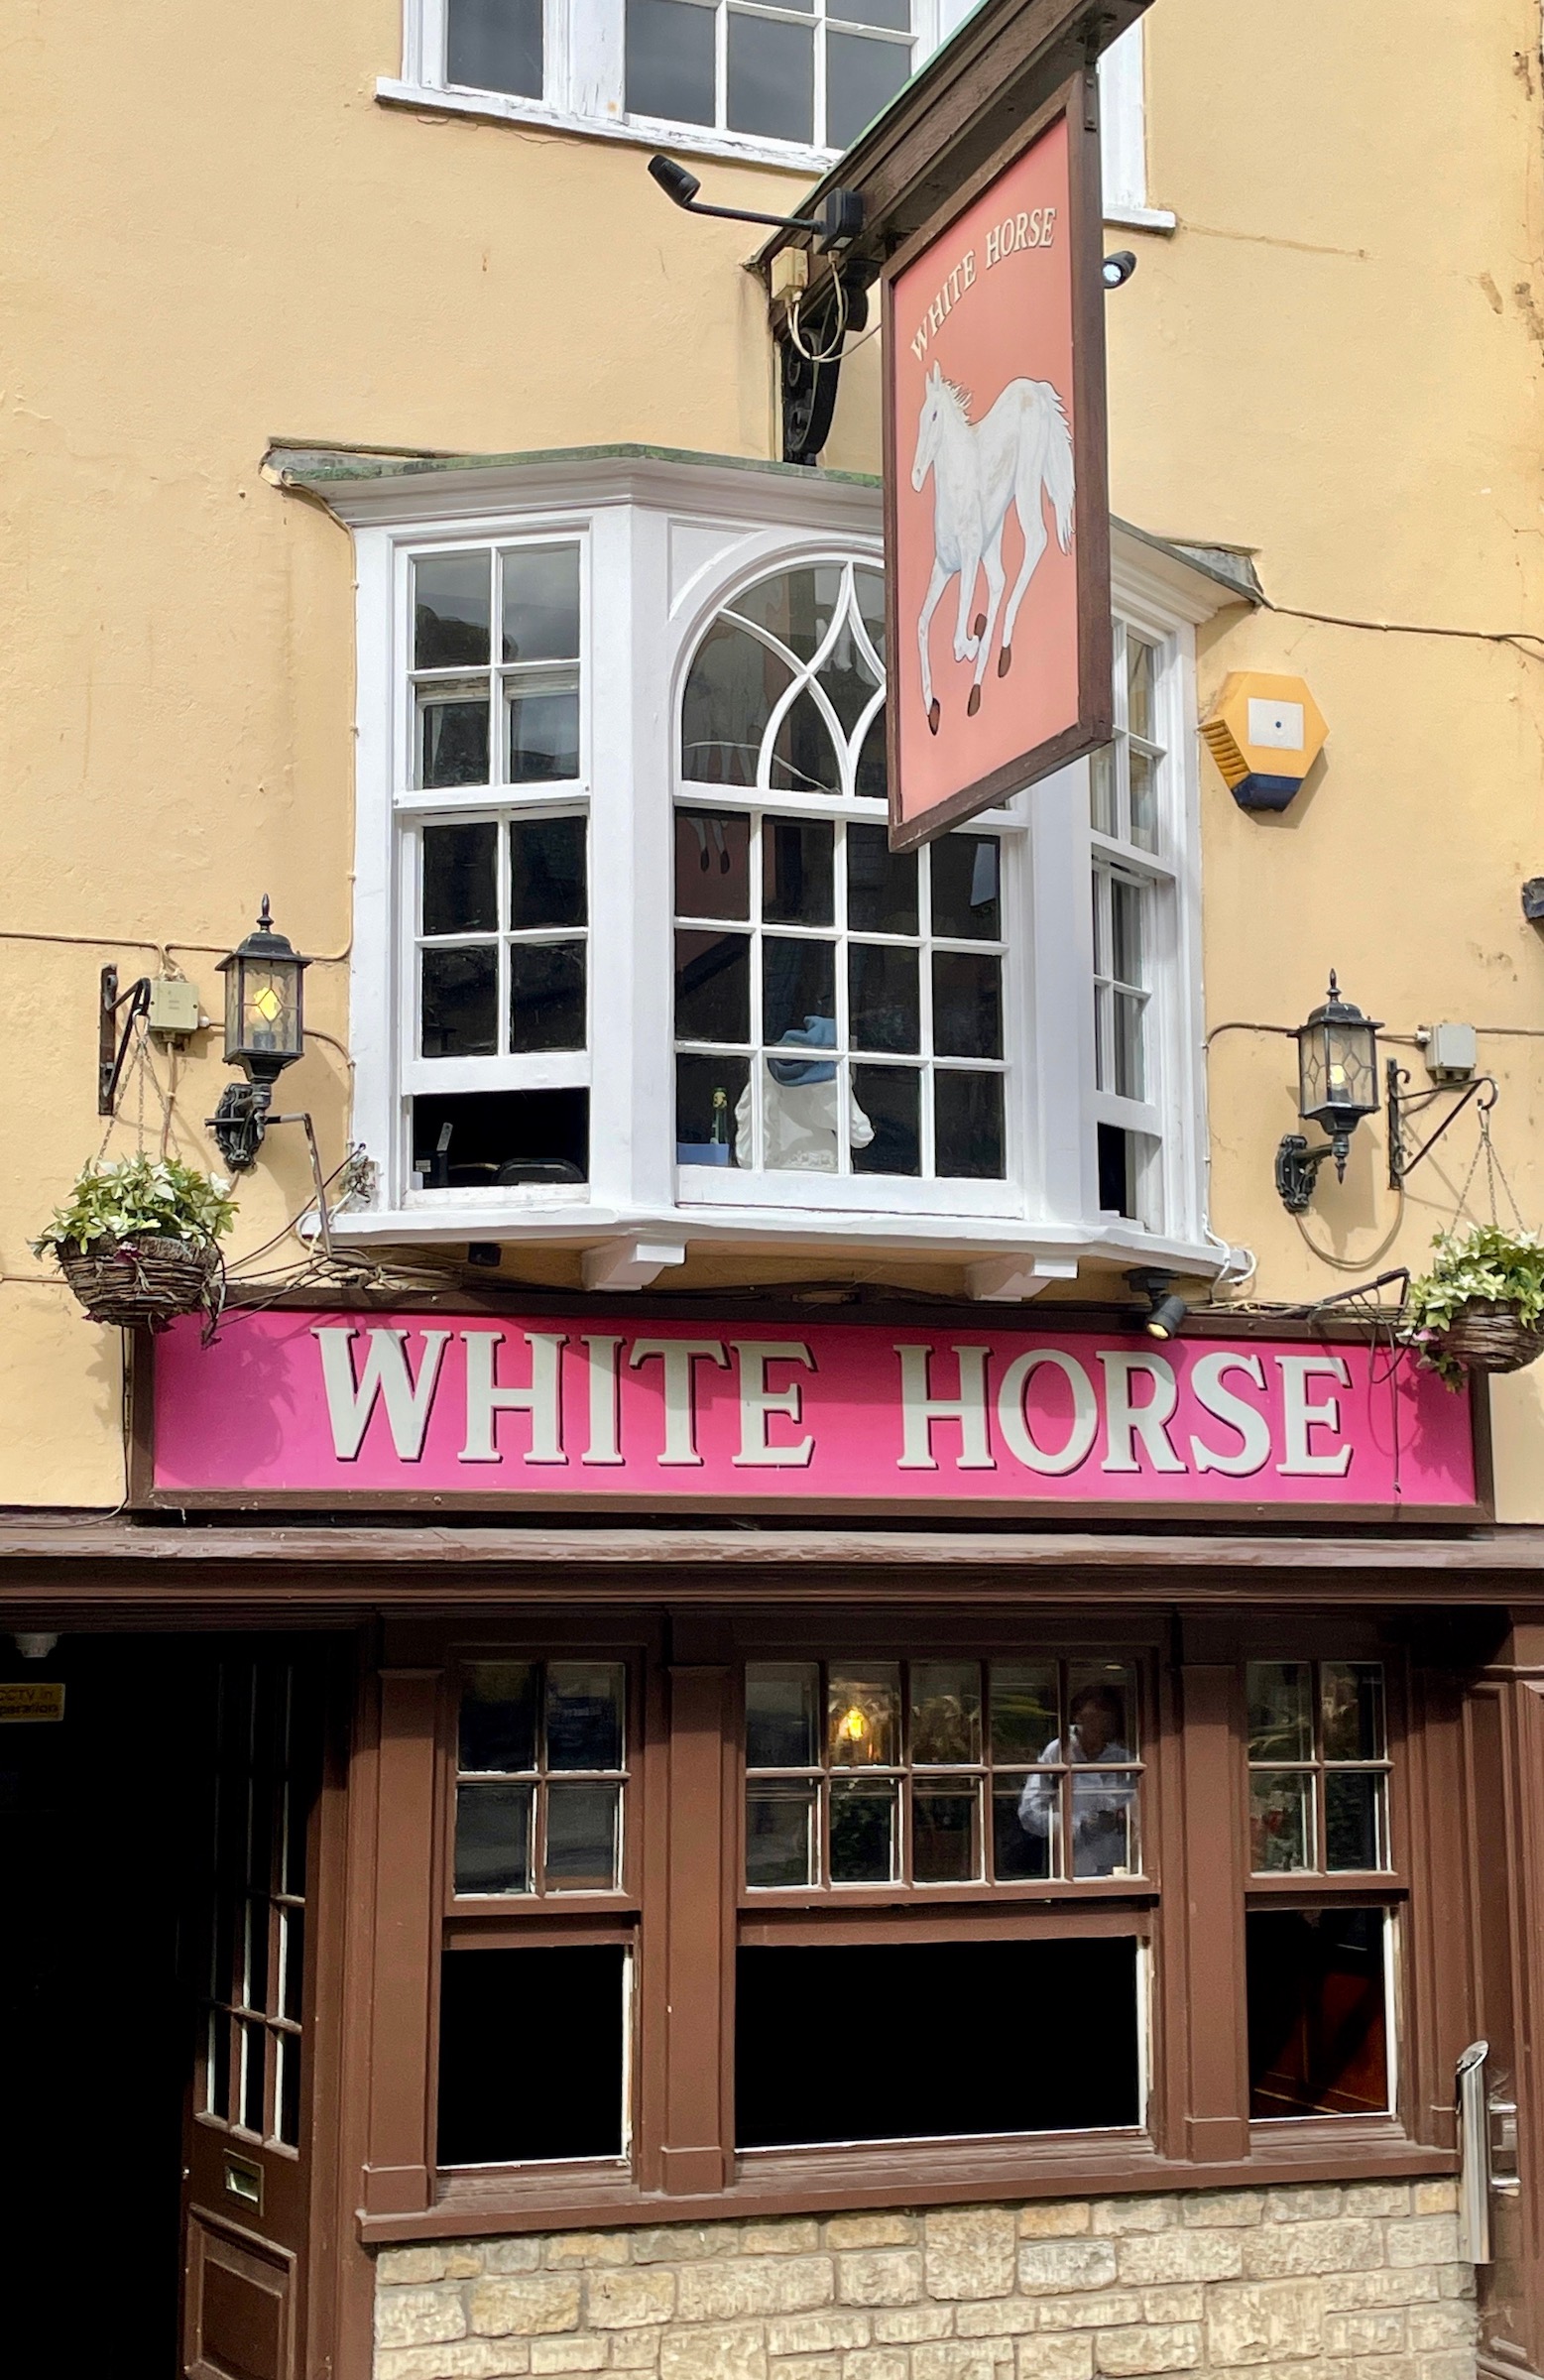 The White Horse, Haunt of Inspector Morse, Oxford